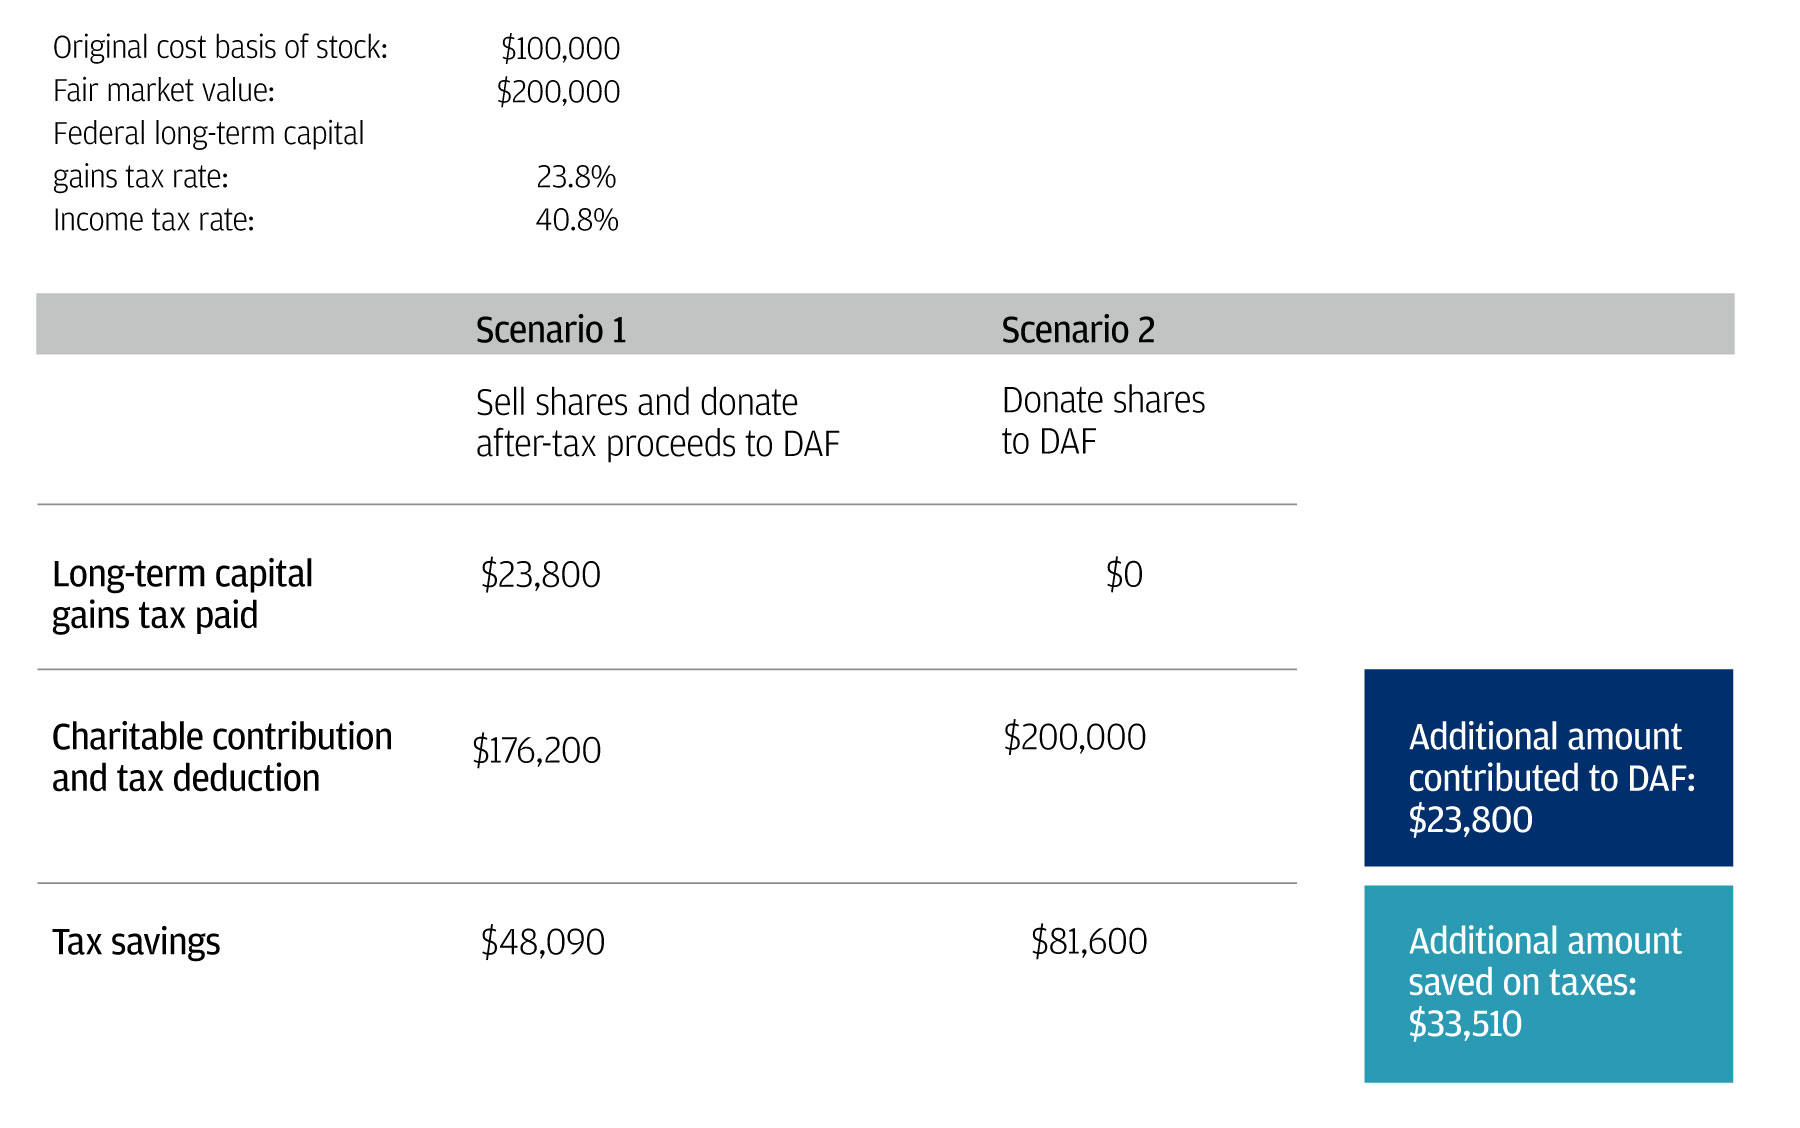 This chart details tax savings outcomes from two different scenarios: Scenario 1 where the client sells their shares and donates the after-tax proceeds to a Donor Advised Fund (DAF), and Scenario 2 where the client donates their qualified appreciated stock directly to the DAF. The client in scenario 2 had around 40% more in tax savings than the client in scenario 1, and was able to donate additional $23,800 to the DAF.